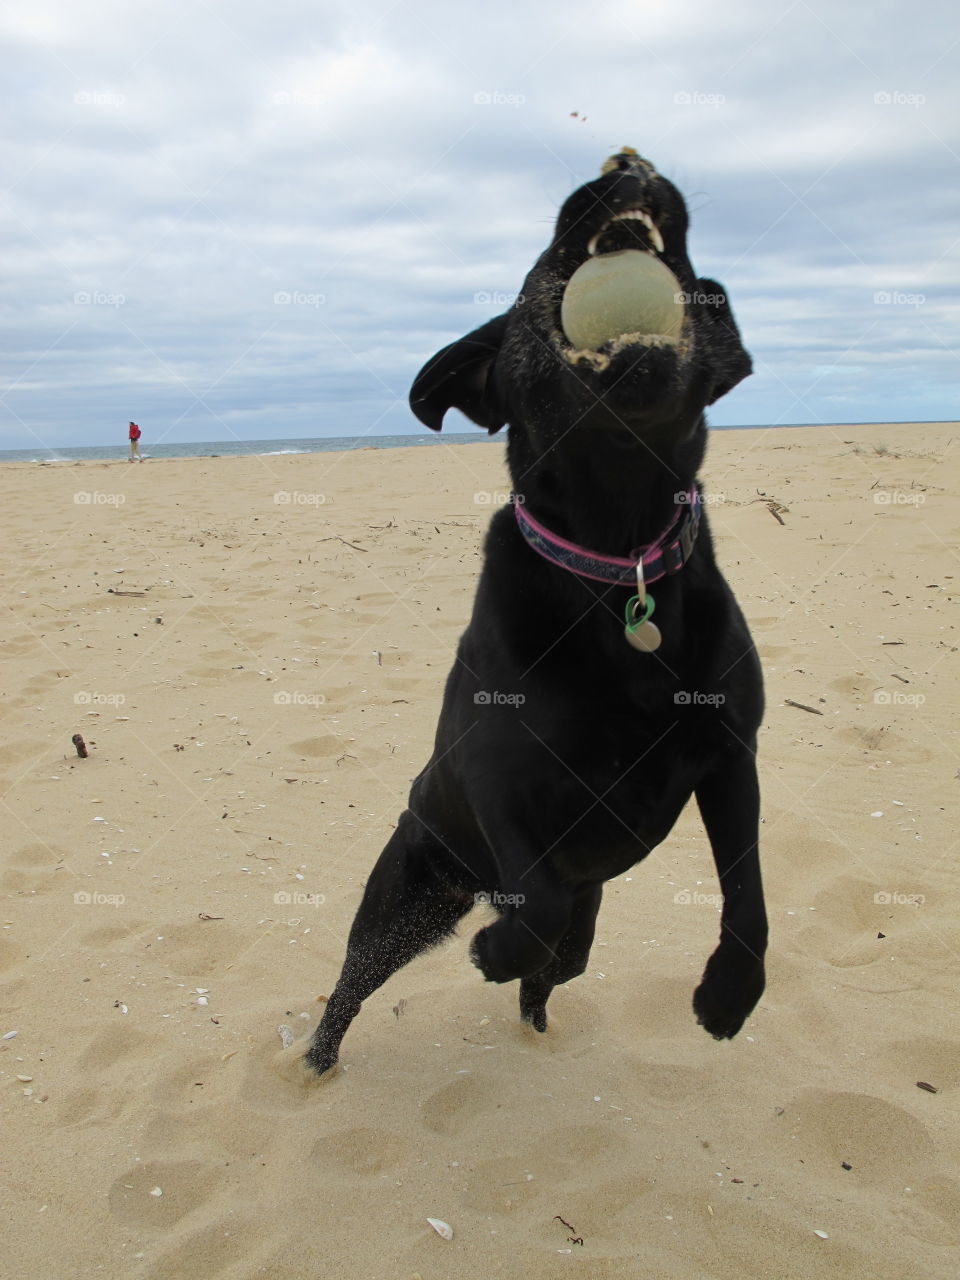 I love playing ball at the beach